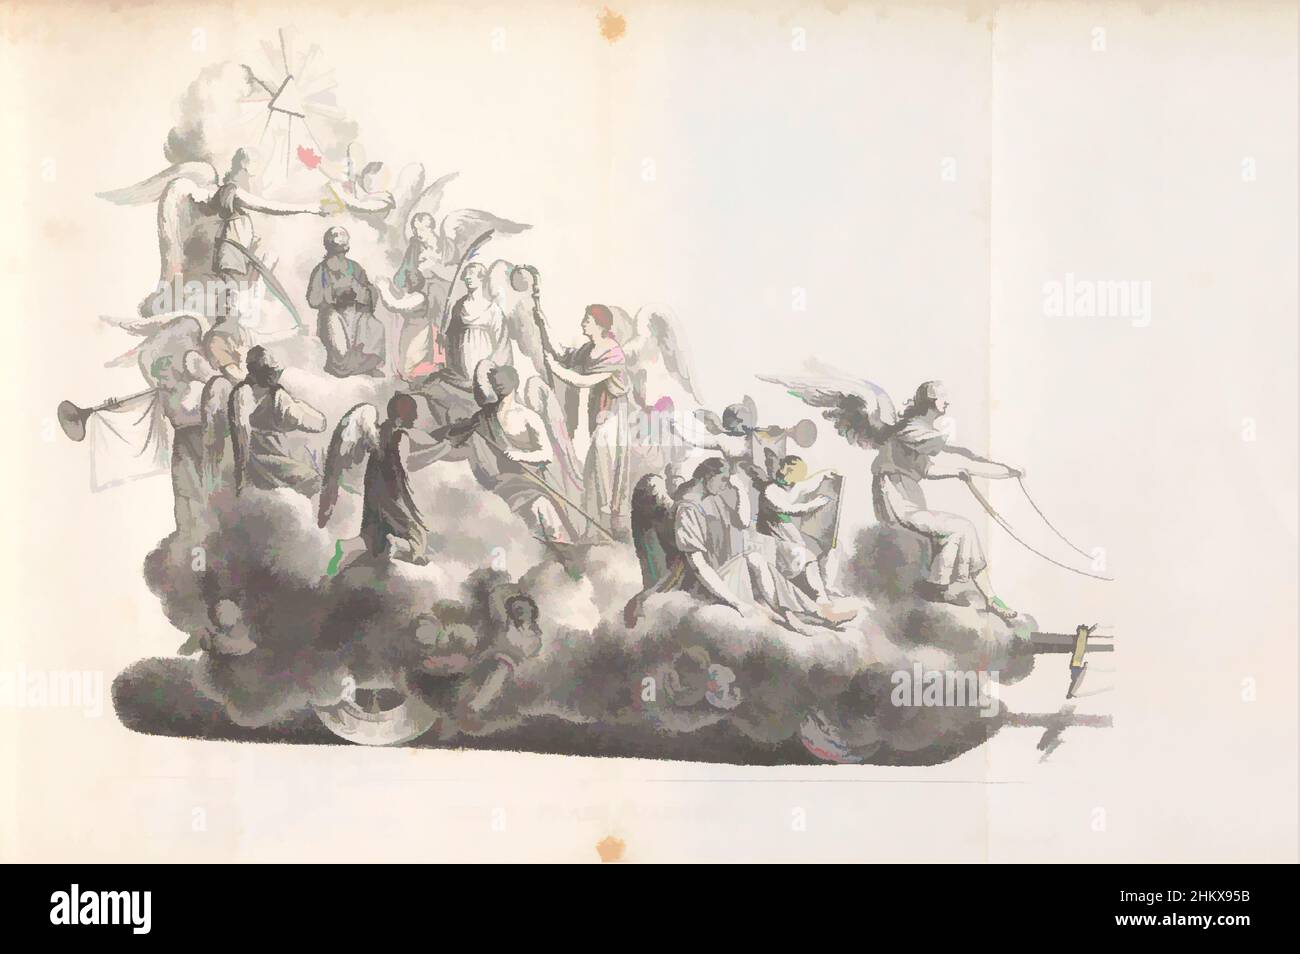 Art inspired by Fourth float in the procession for Saint Rombout, 1825, Fourth Prael-waegen, The fourth float in the procession for Saint Rombout. On the float the blessing of Rombout amidst angels. The procession was held on 28 June, 5 and 12 July 1825. Illustration in a publication on, Classic works modernized by Artotop with a splash of modernity. Shapes, color and value, eye-catching visual impact on art. Emotions through freedom of artworks in a contemporary way. A timeless message pursuing a wildly creative new direction. Artists turning to the digital medium and creating the Artotop NFT Stock Photo